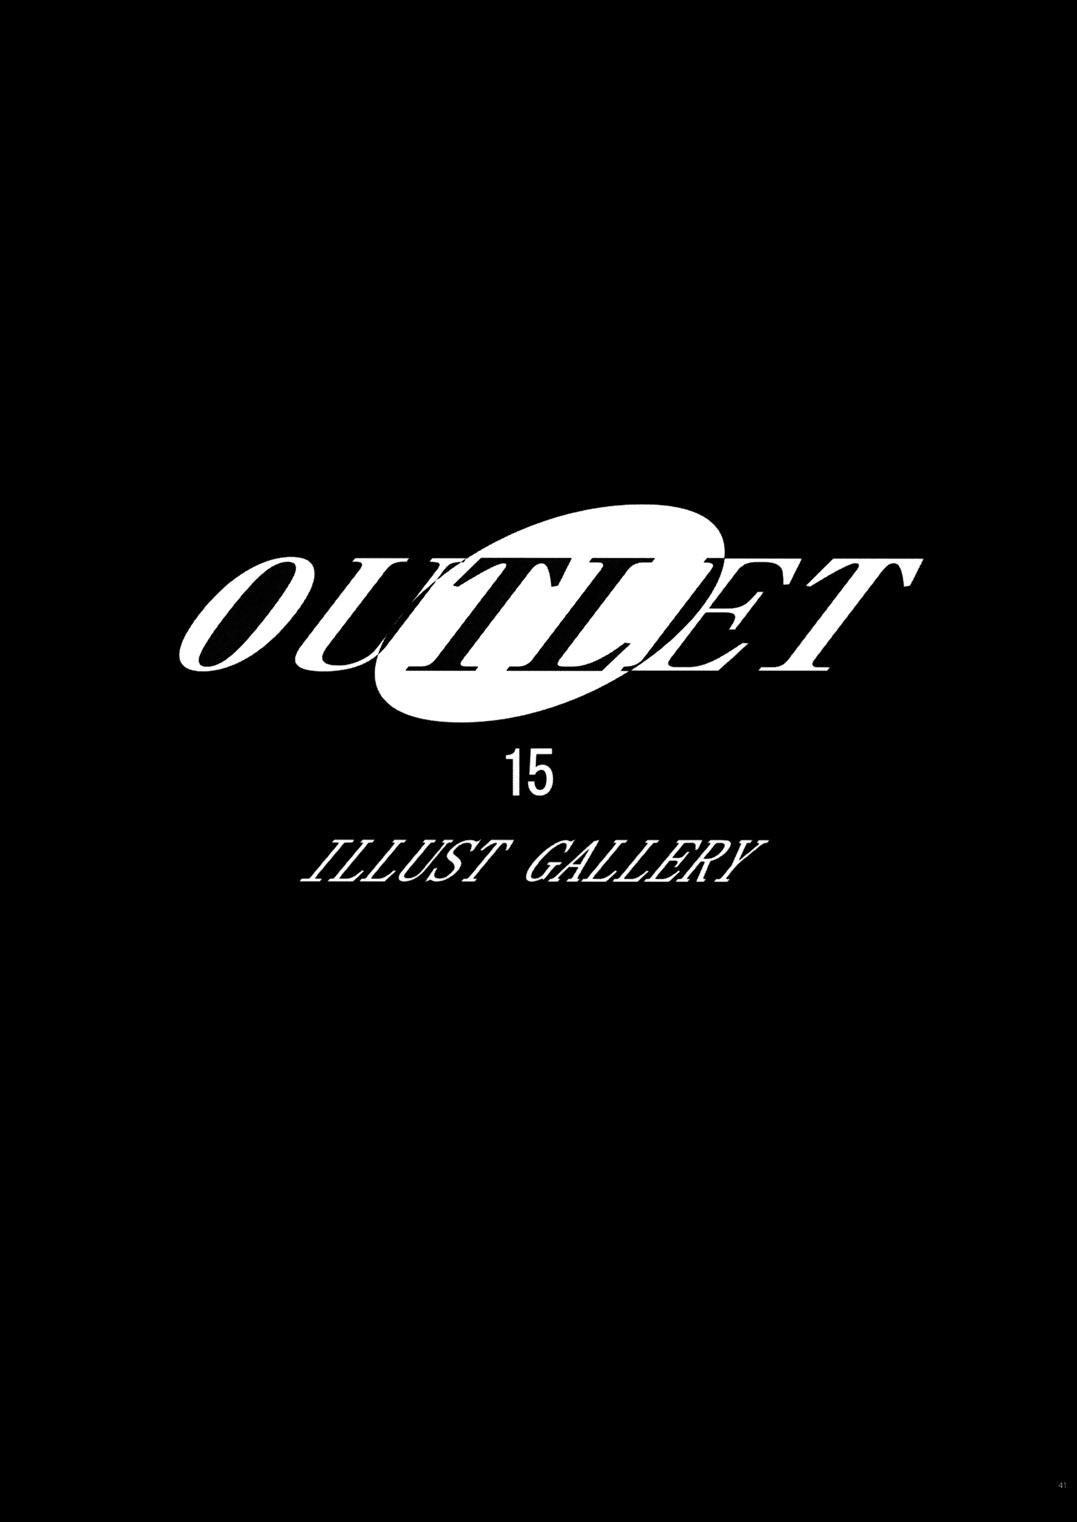 OUTLET 15 40